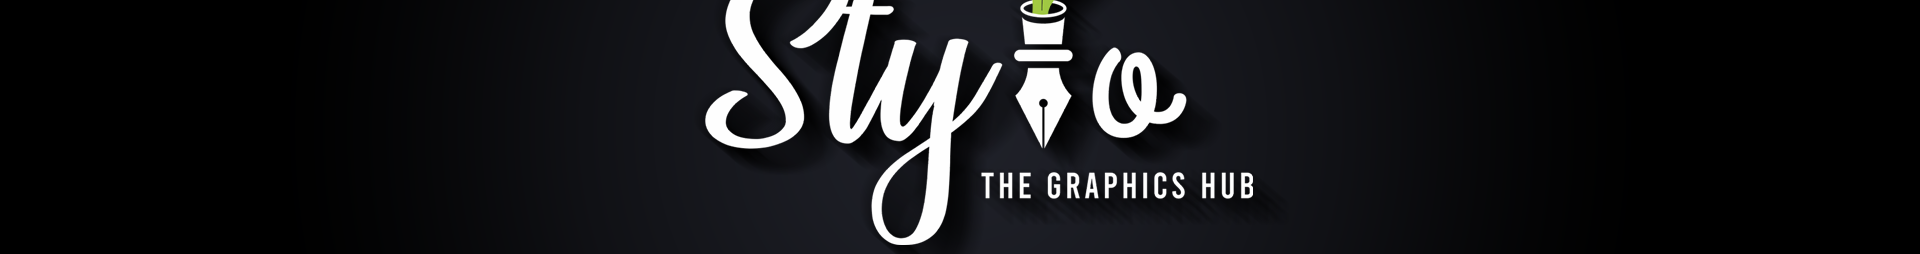 Stylo The Creative Agency's profile banner